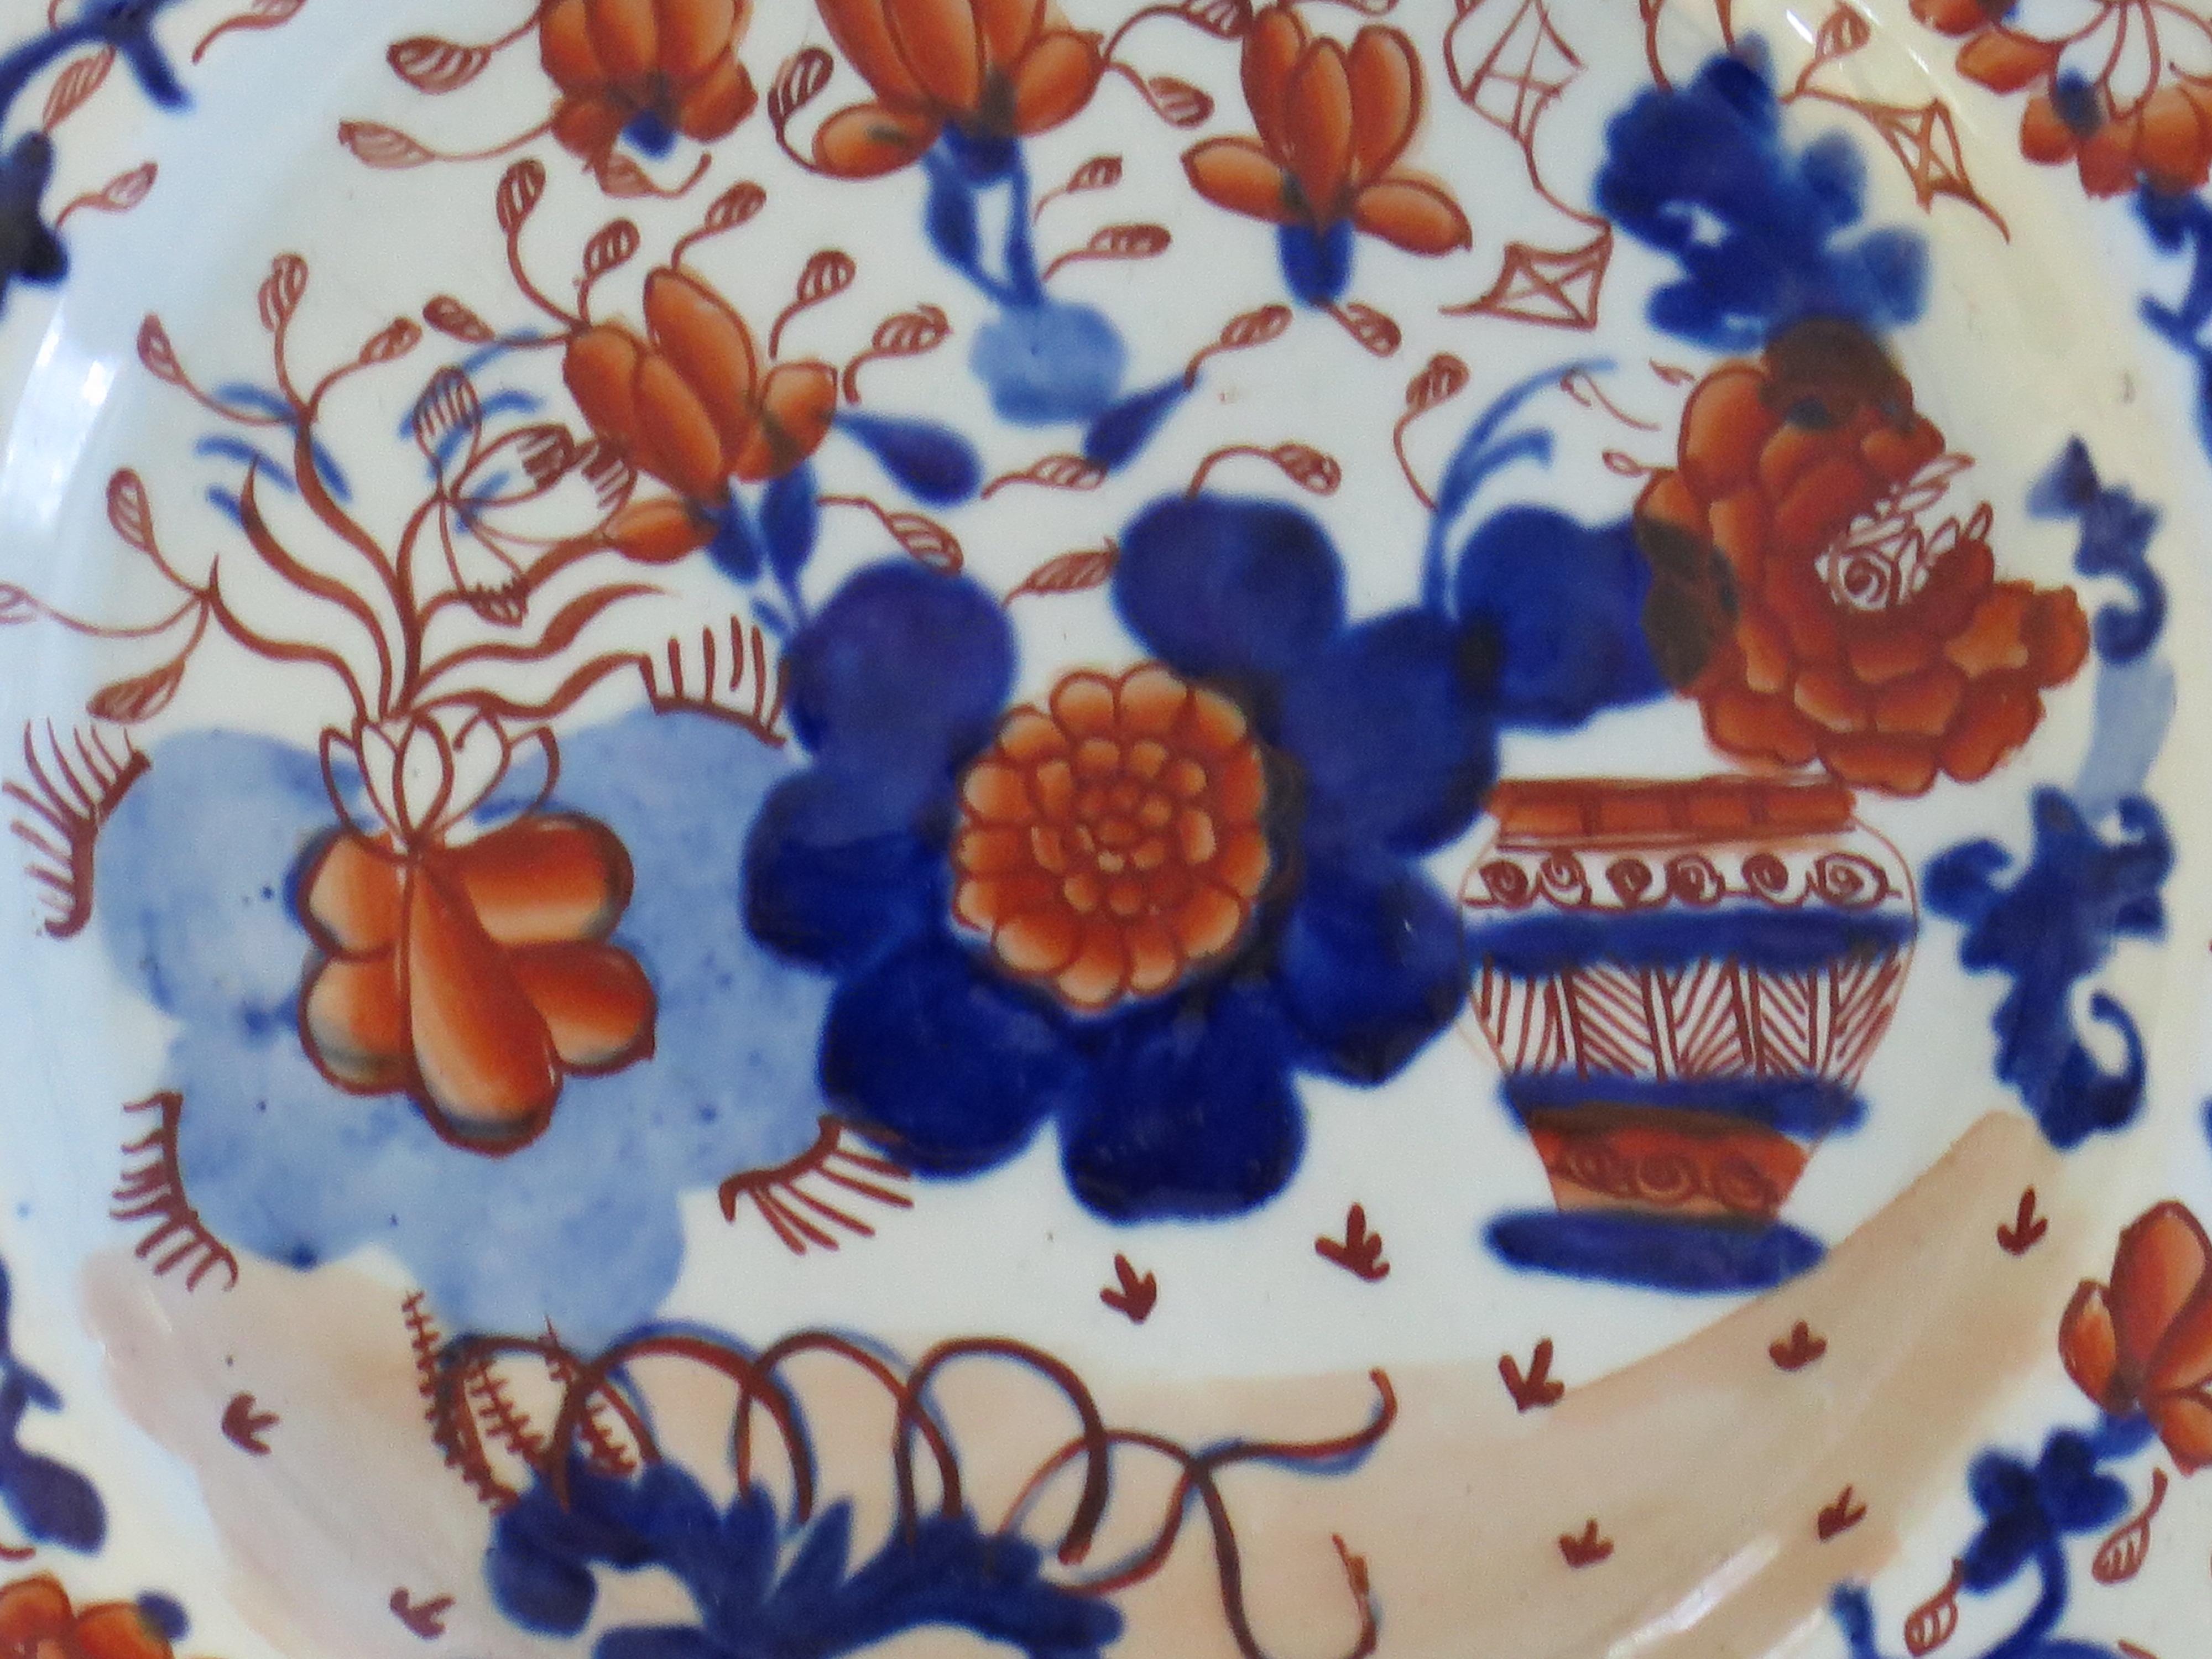 This is an early Mason's ironstone side plate, finely hand painted in the very decorative Basket Japan pattern, produced by the Mason's factory at Lane Delph, Staffordshire, England, circa 1813-1820.

The plate is circular with a notched indented